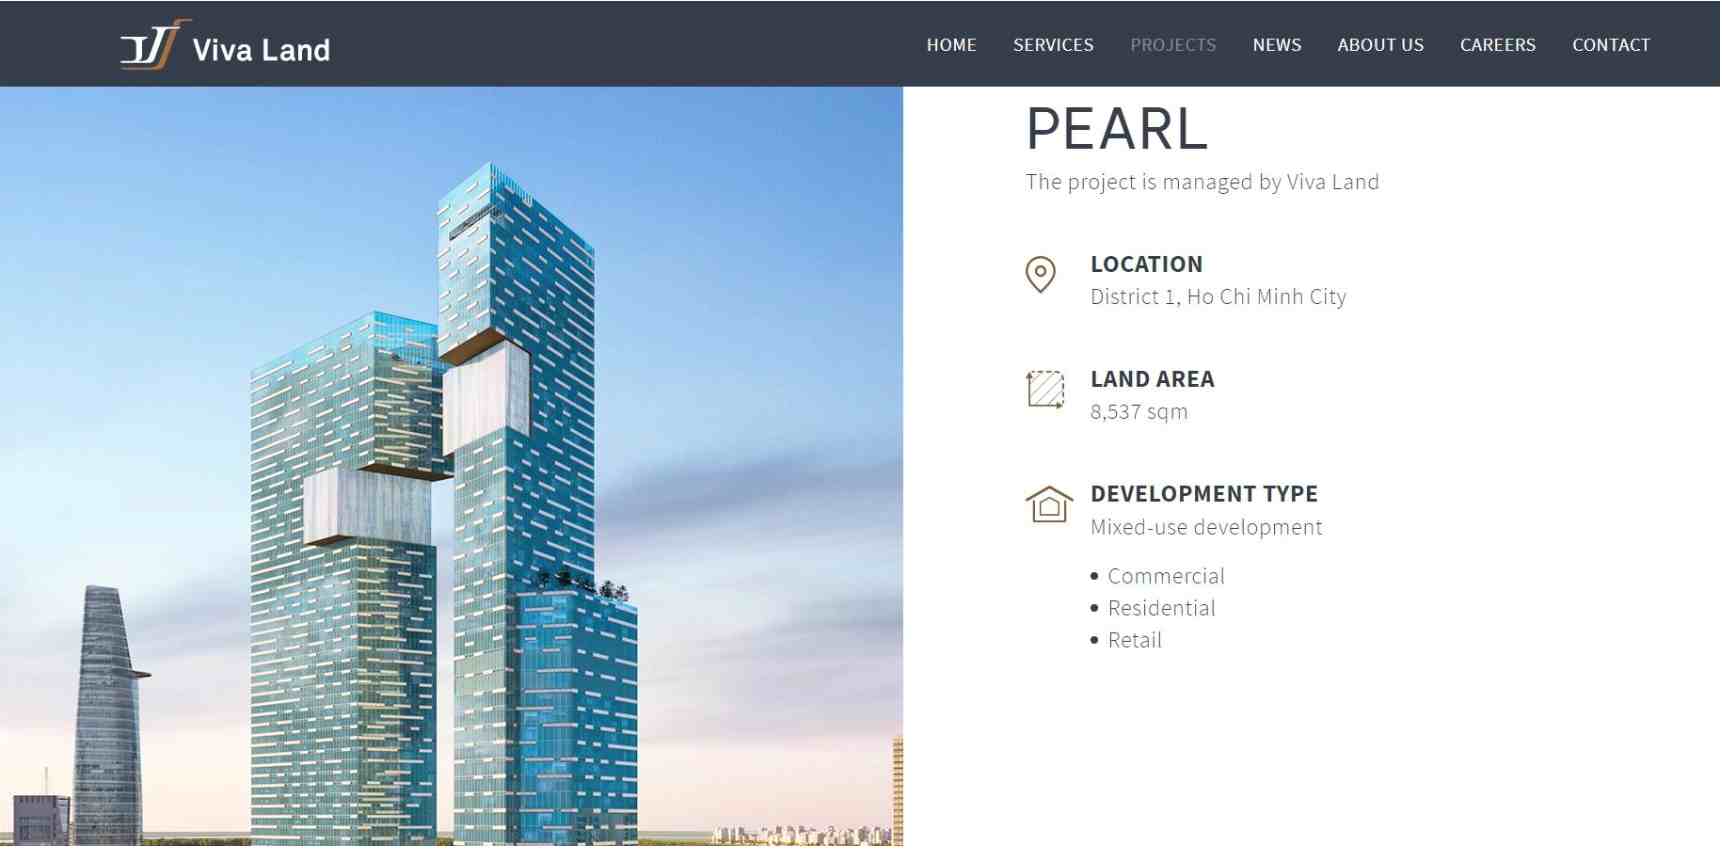 Viva Land replaces Masterise, announces Pearl project in District 1, formerly known as One Central HCM